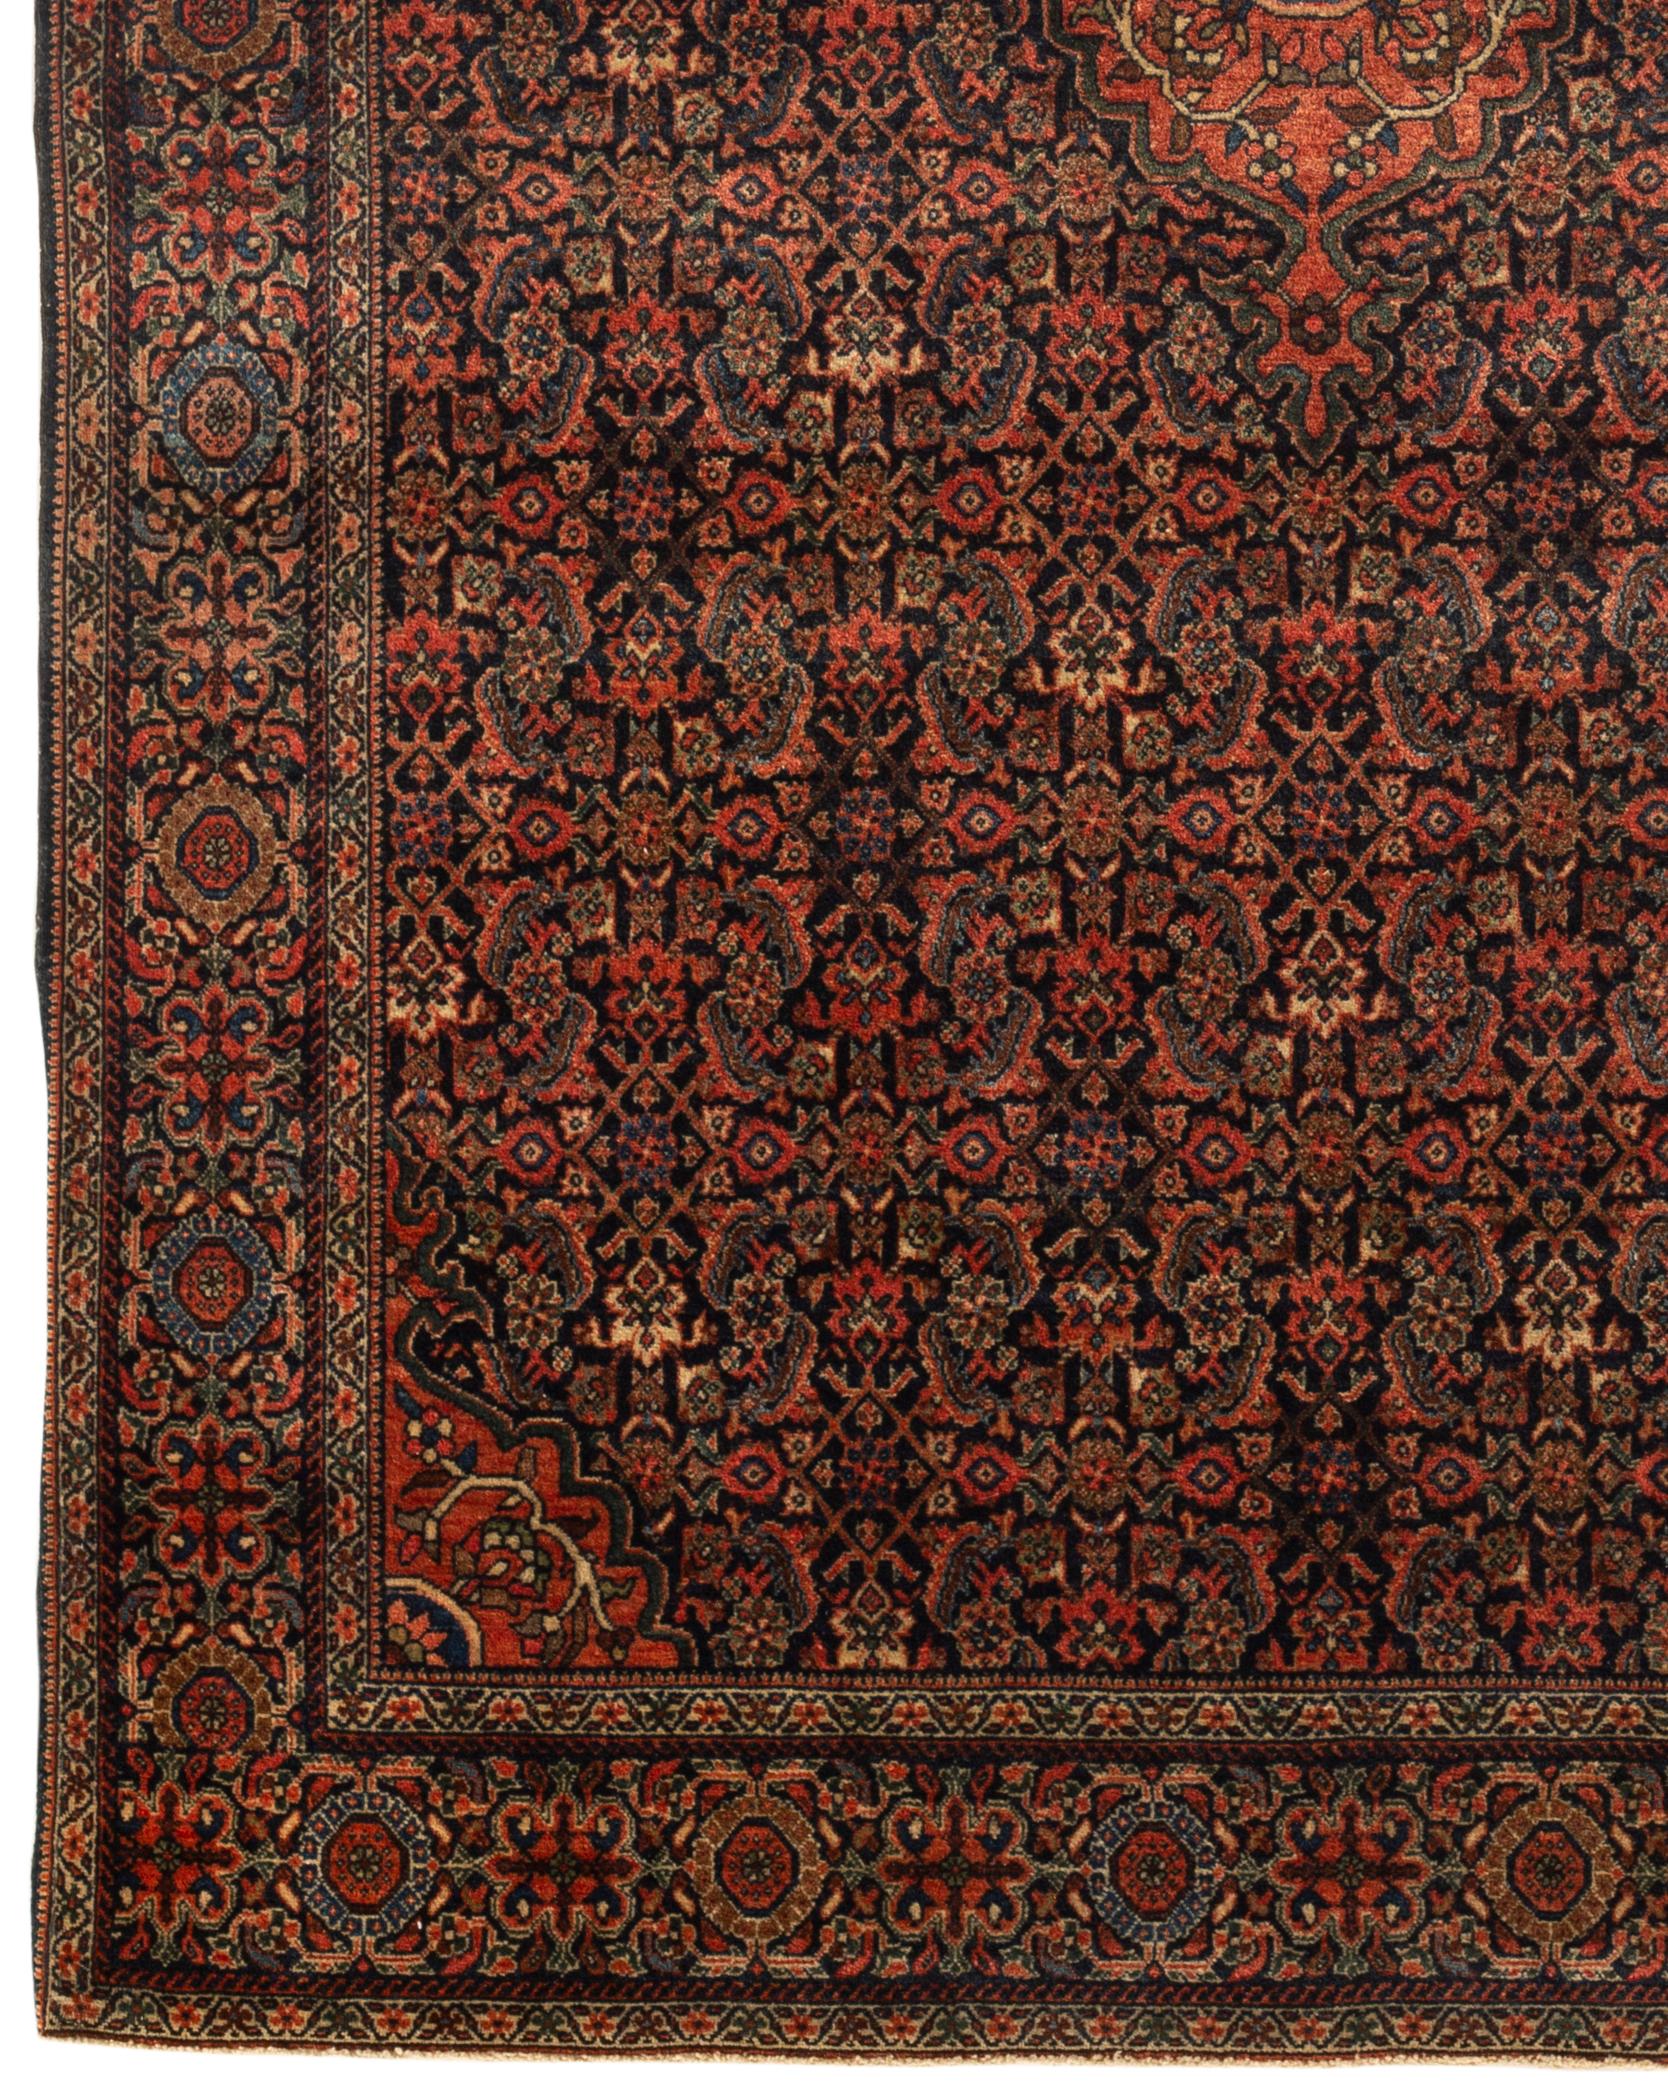 Antique Persian Farahan Sarouk rug, circa 1880. Sarouk rugs come from west central Persia. This is a true work of art the intricate floral elements so creatively designed and then handwoven by truly skilled weavers to Craft a wonderful rug that will